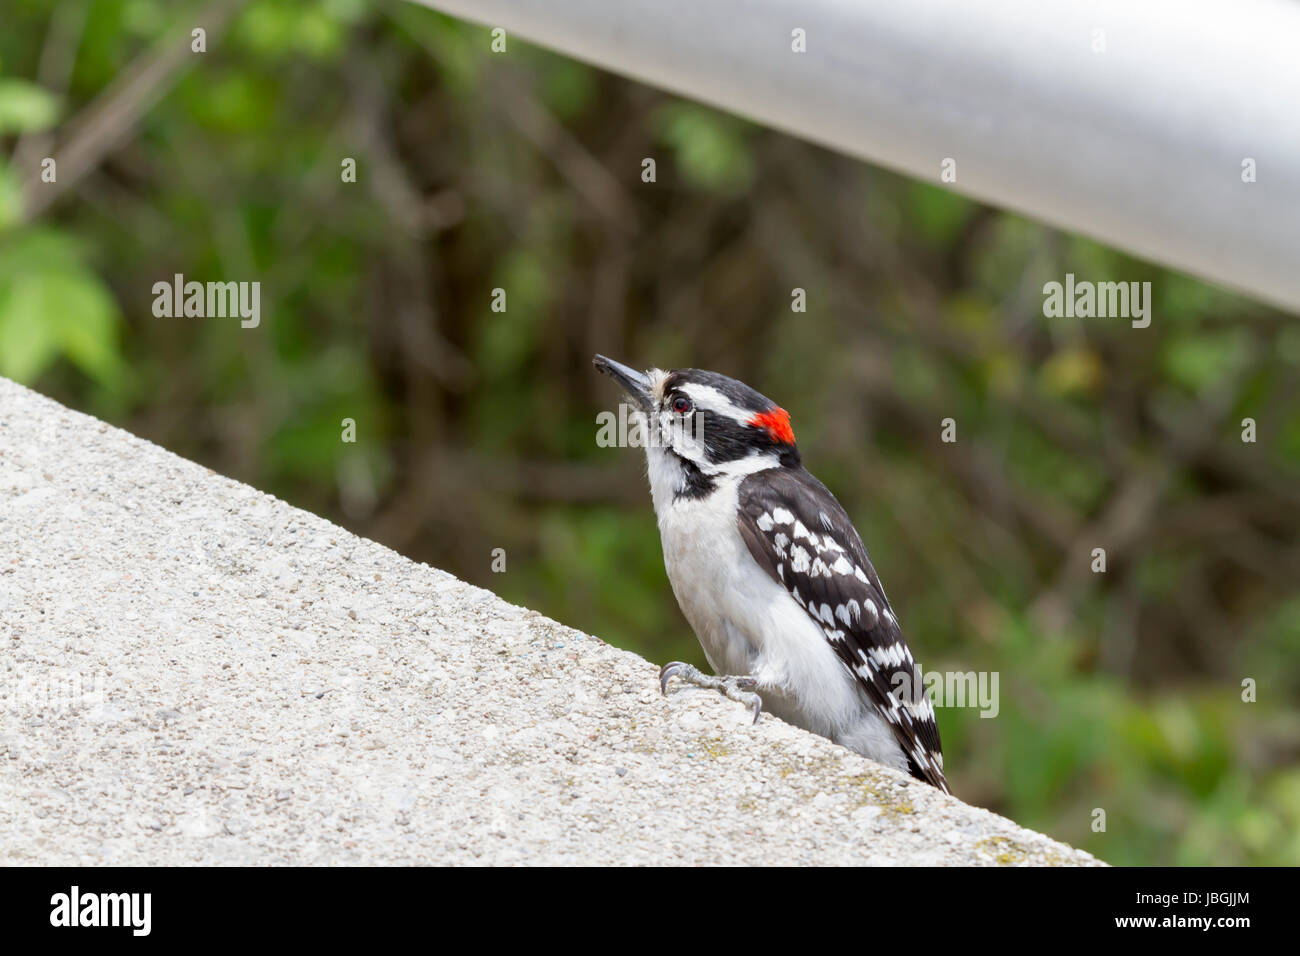 A Downy Woodpecker perched on a concrete  wall Stock Photo